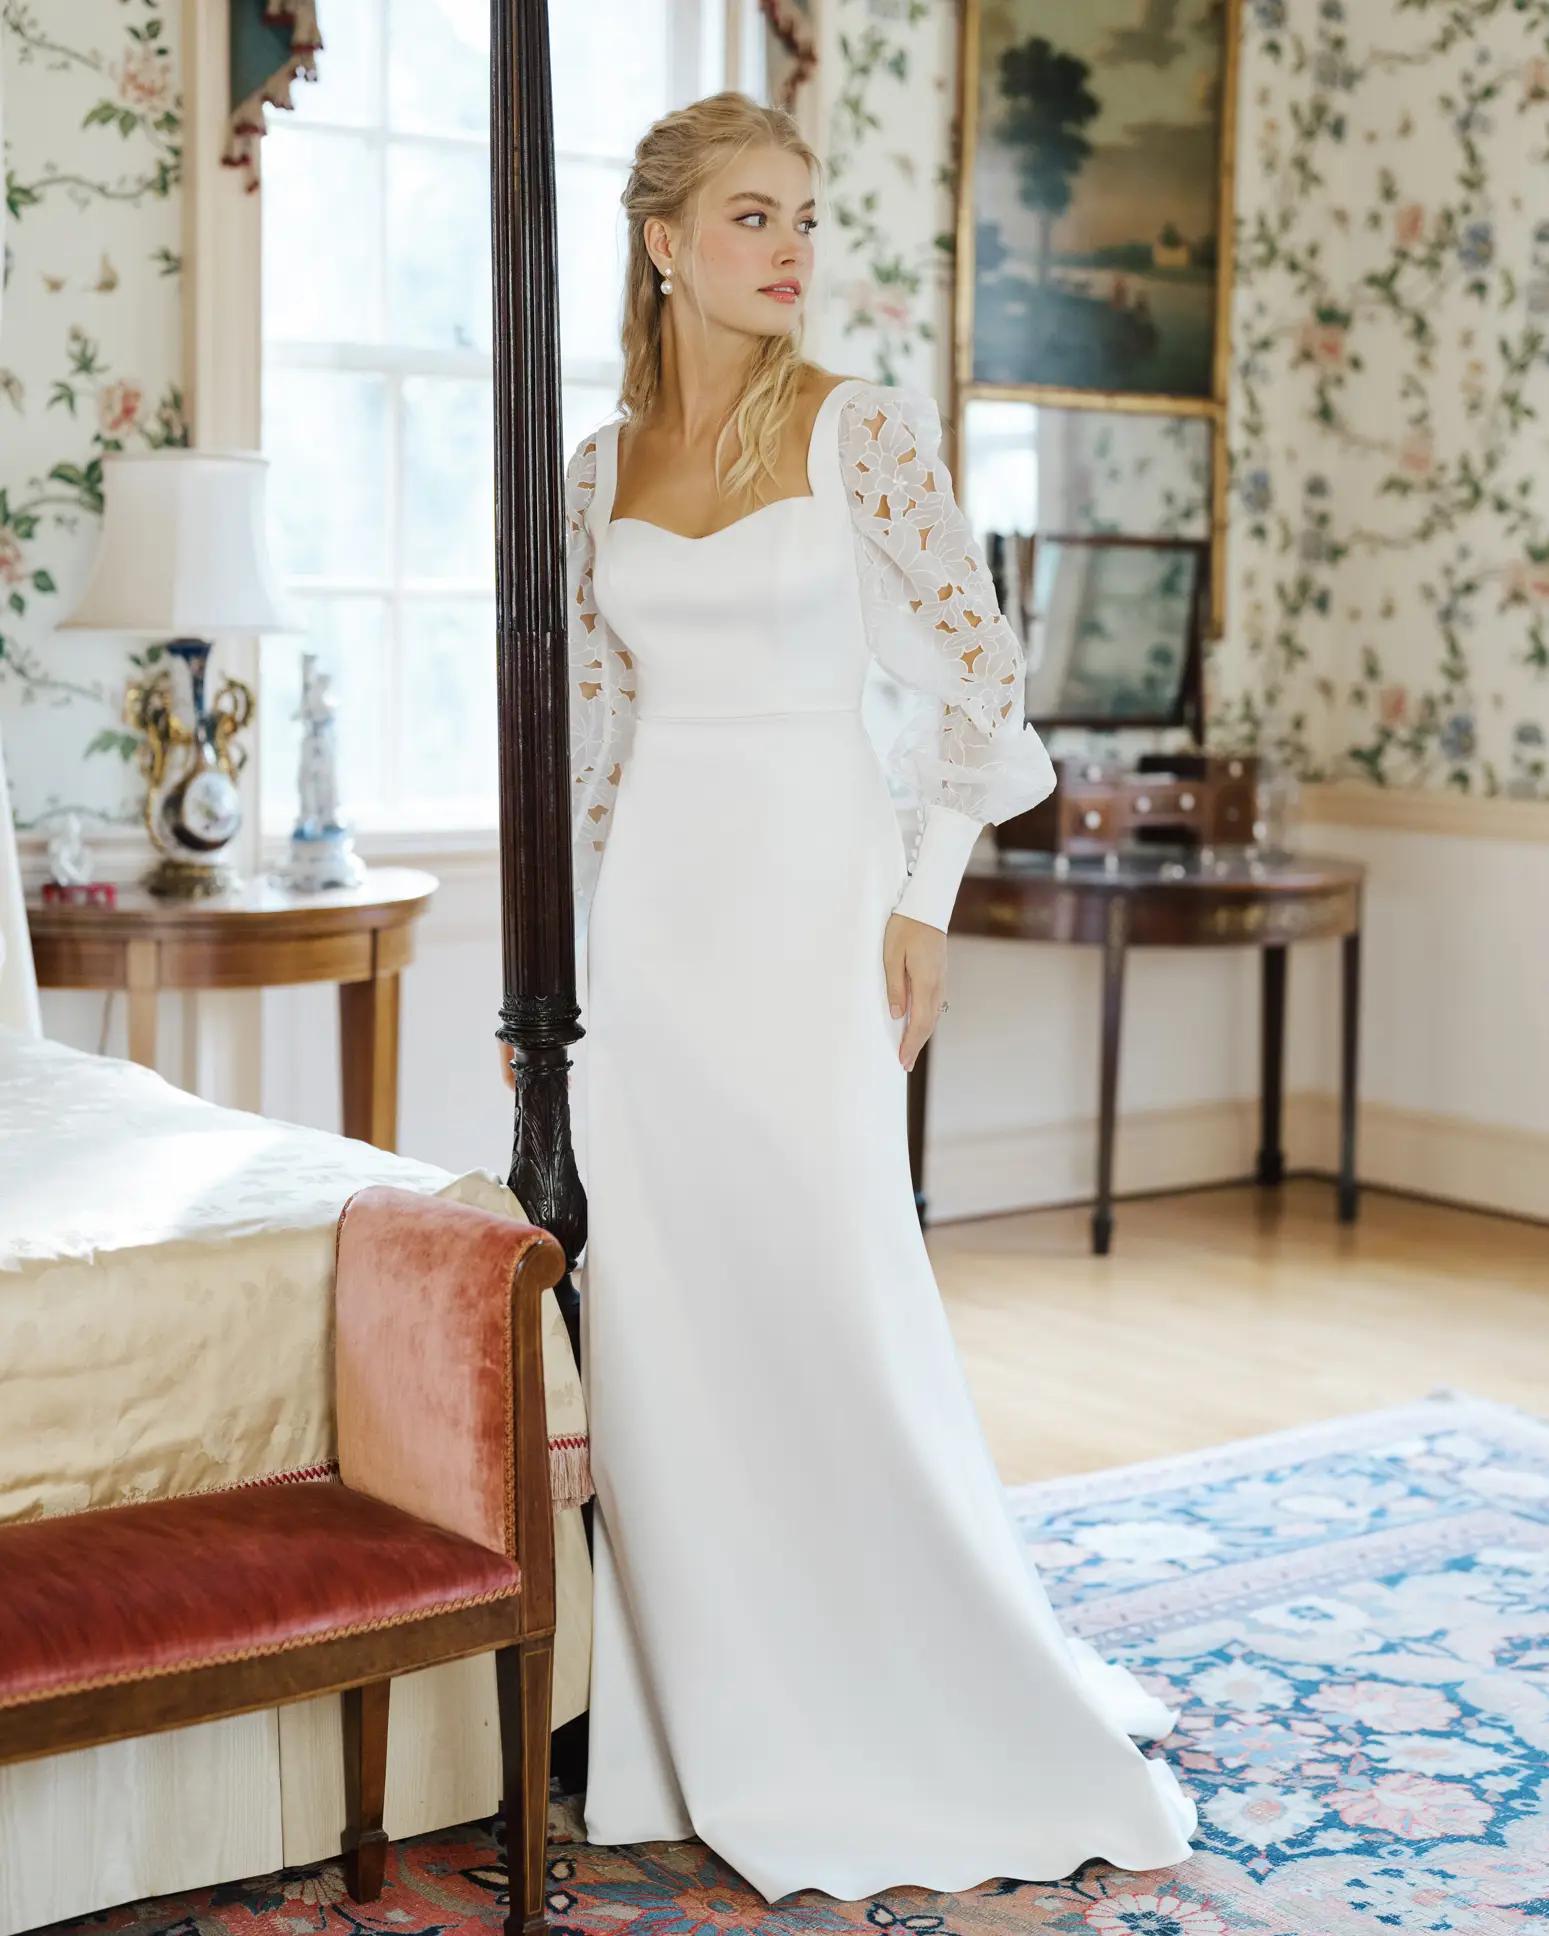 Grady wedding dress by Anne Barge Blue Willow with sweetheart neckline and crepe back satin fitted silhouette with detachable sleeves